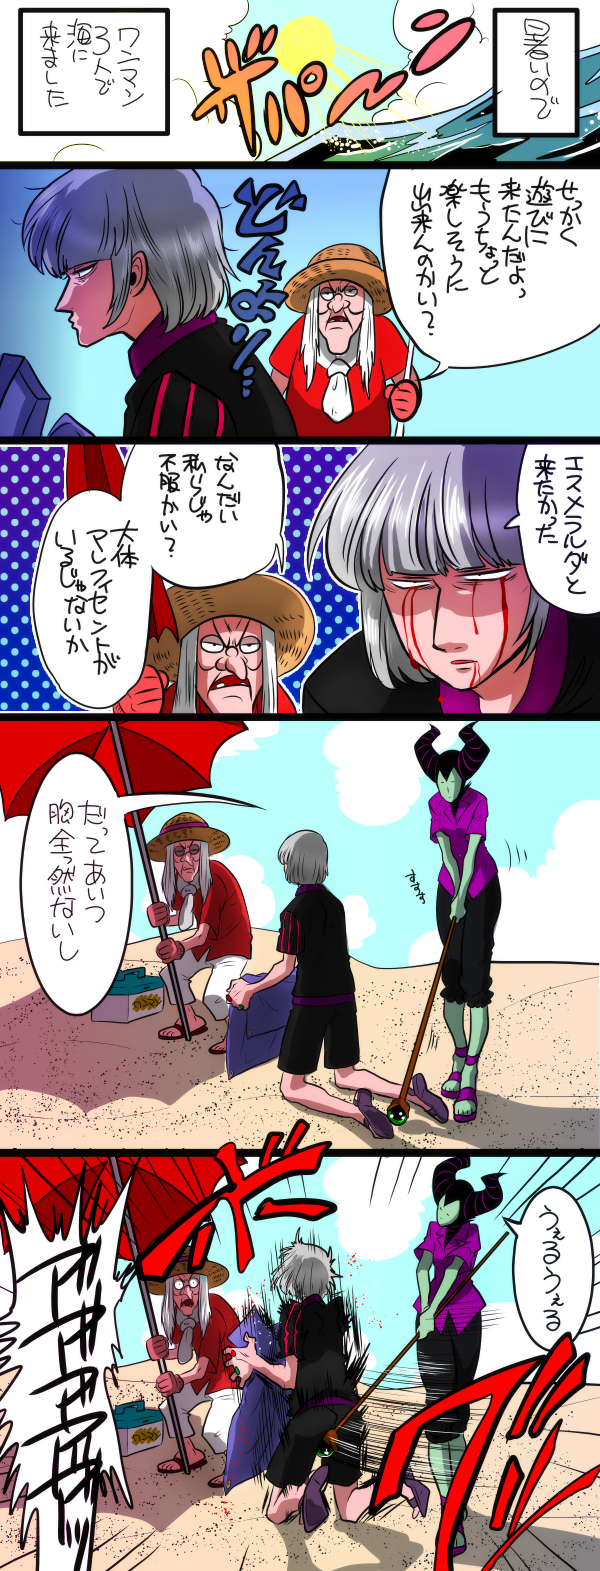 1boy 2girls 5koma beach beach_umbrella blood capri_pants casual claude_frollo comic disney green_skin grey_hair groin_attack highres horns long_nose maleficent marimo_(yousei_ranbu) multiple_girls old_woman one_man's_dream_ii pain polo_shirt sandals shorts sleeping_beauty staff the_hunchback_of_notre_dame translation_request warts white_hair witch_(snow_white) younger